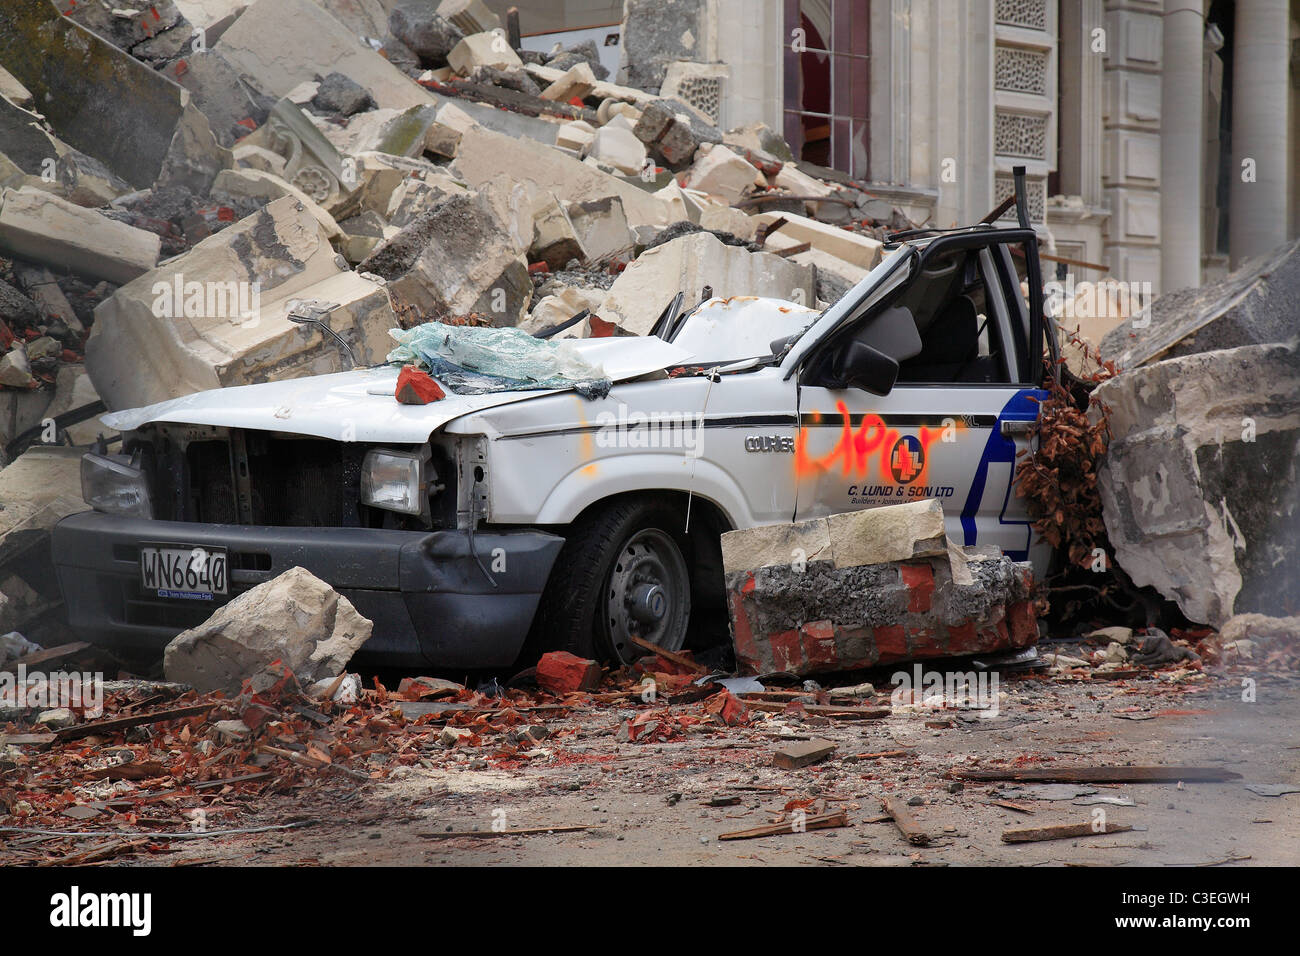 Earthquake damaged car from Feb 22nd, Christchurch New Zealand Stock Photo